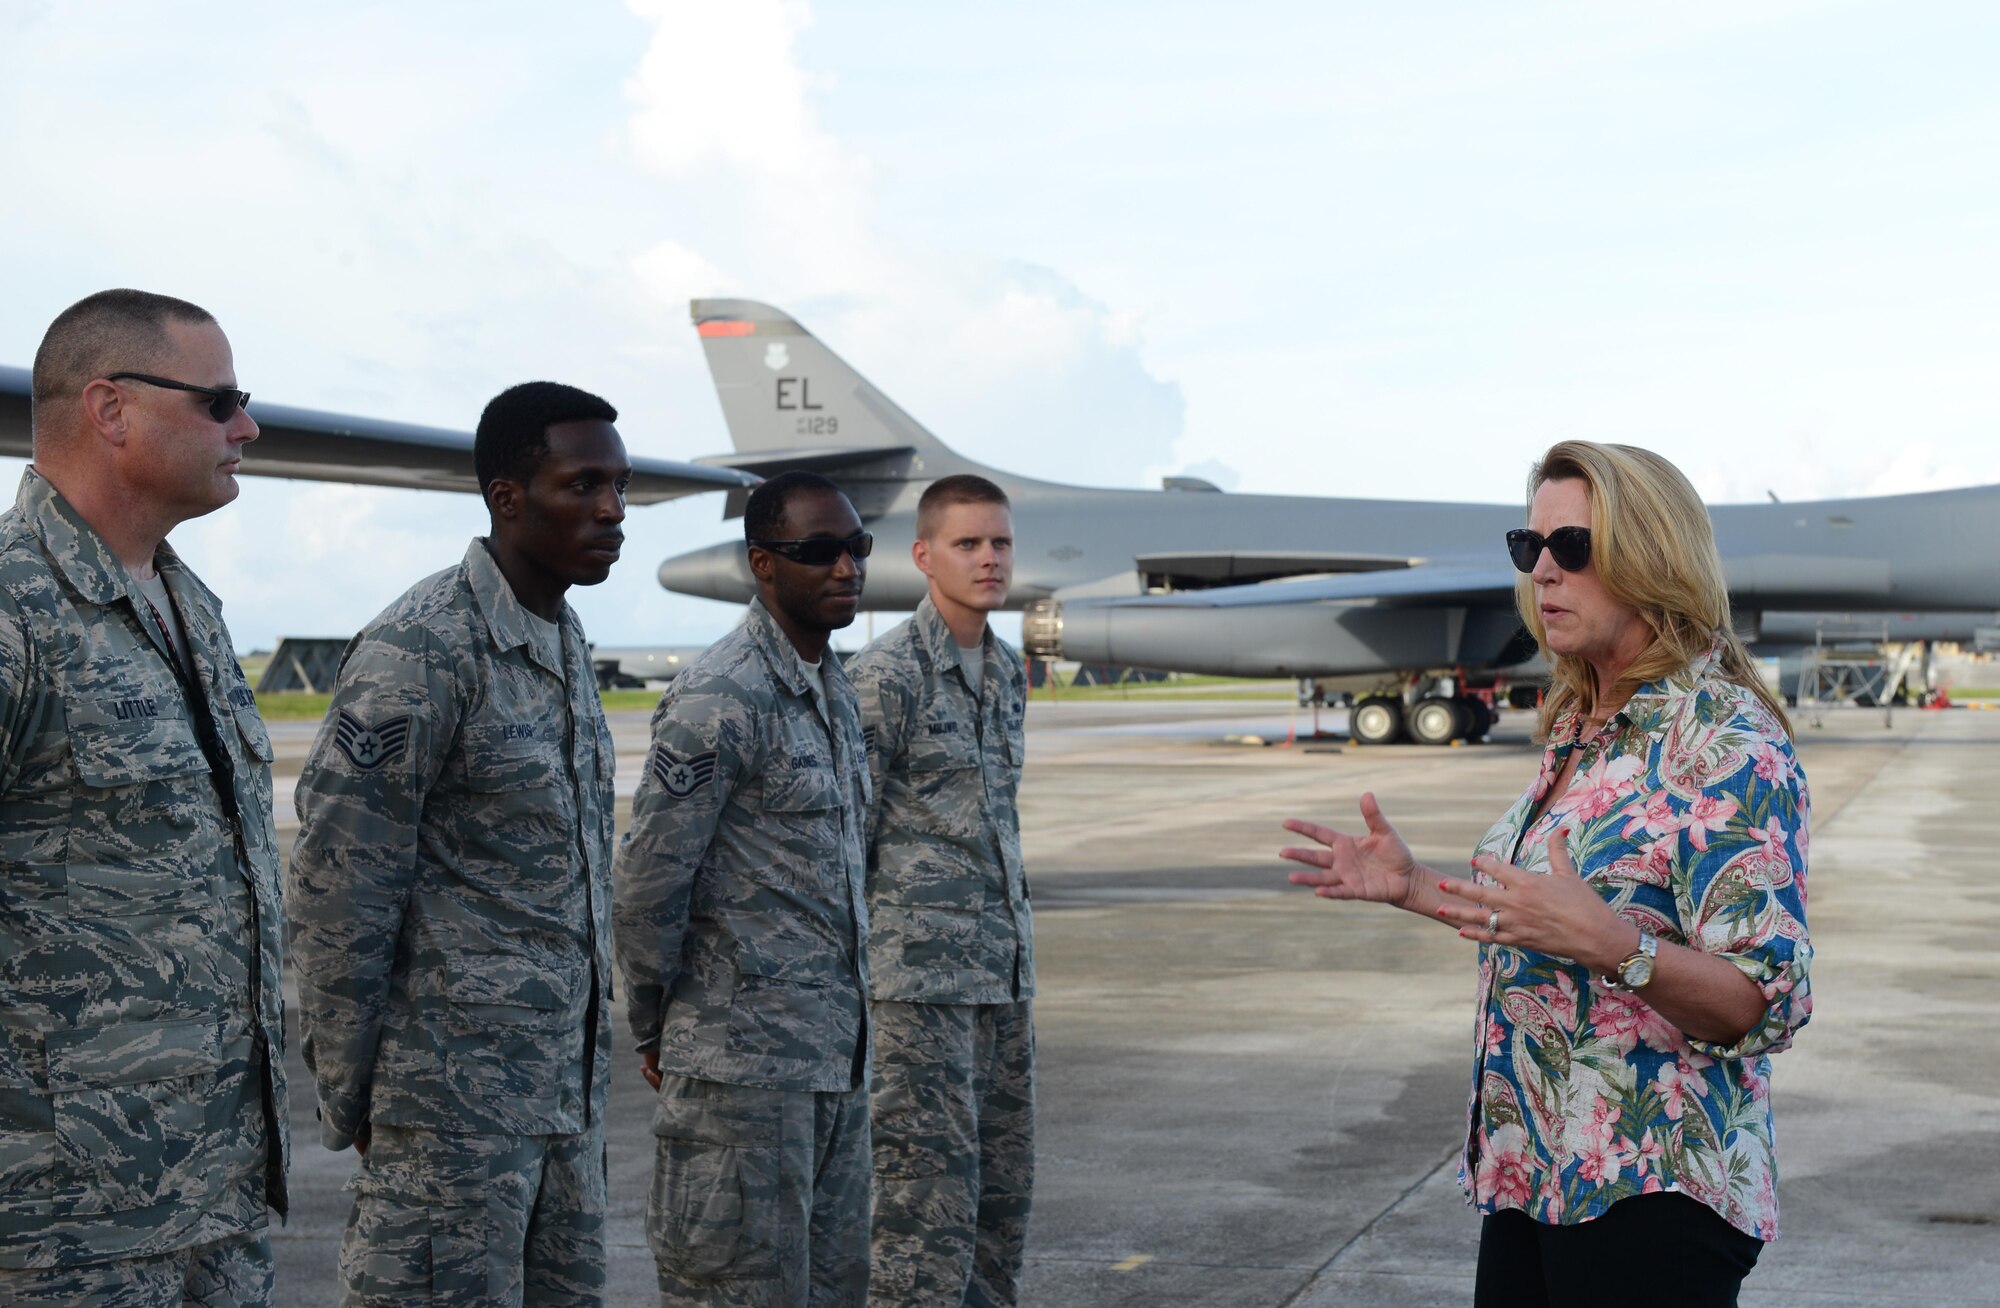 Secretary of the Air Force Deborah Lee James talks with B-1B Lancer maintainers during a visit Aug. 30, 2016, at Andersen Air Force Base, Guam. James wrapped up an 11-day trip visiting various partners throughout the Indo-Asia-Pacific region. (U.S. Air Force photo by Airman 1st Class Arielle Vasquez/Released)